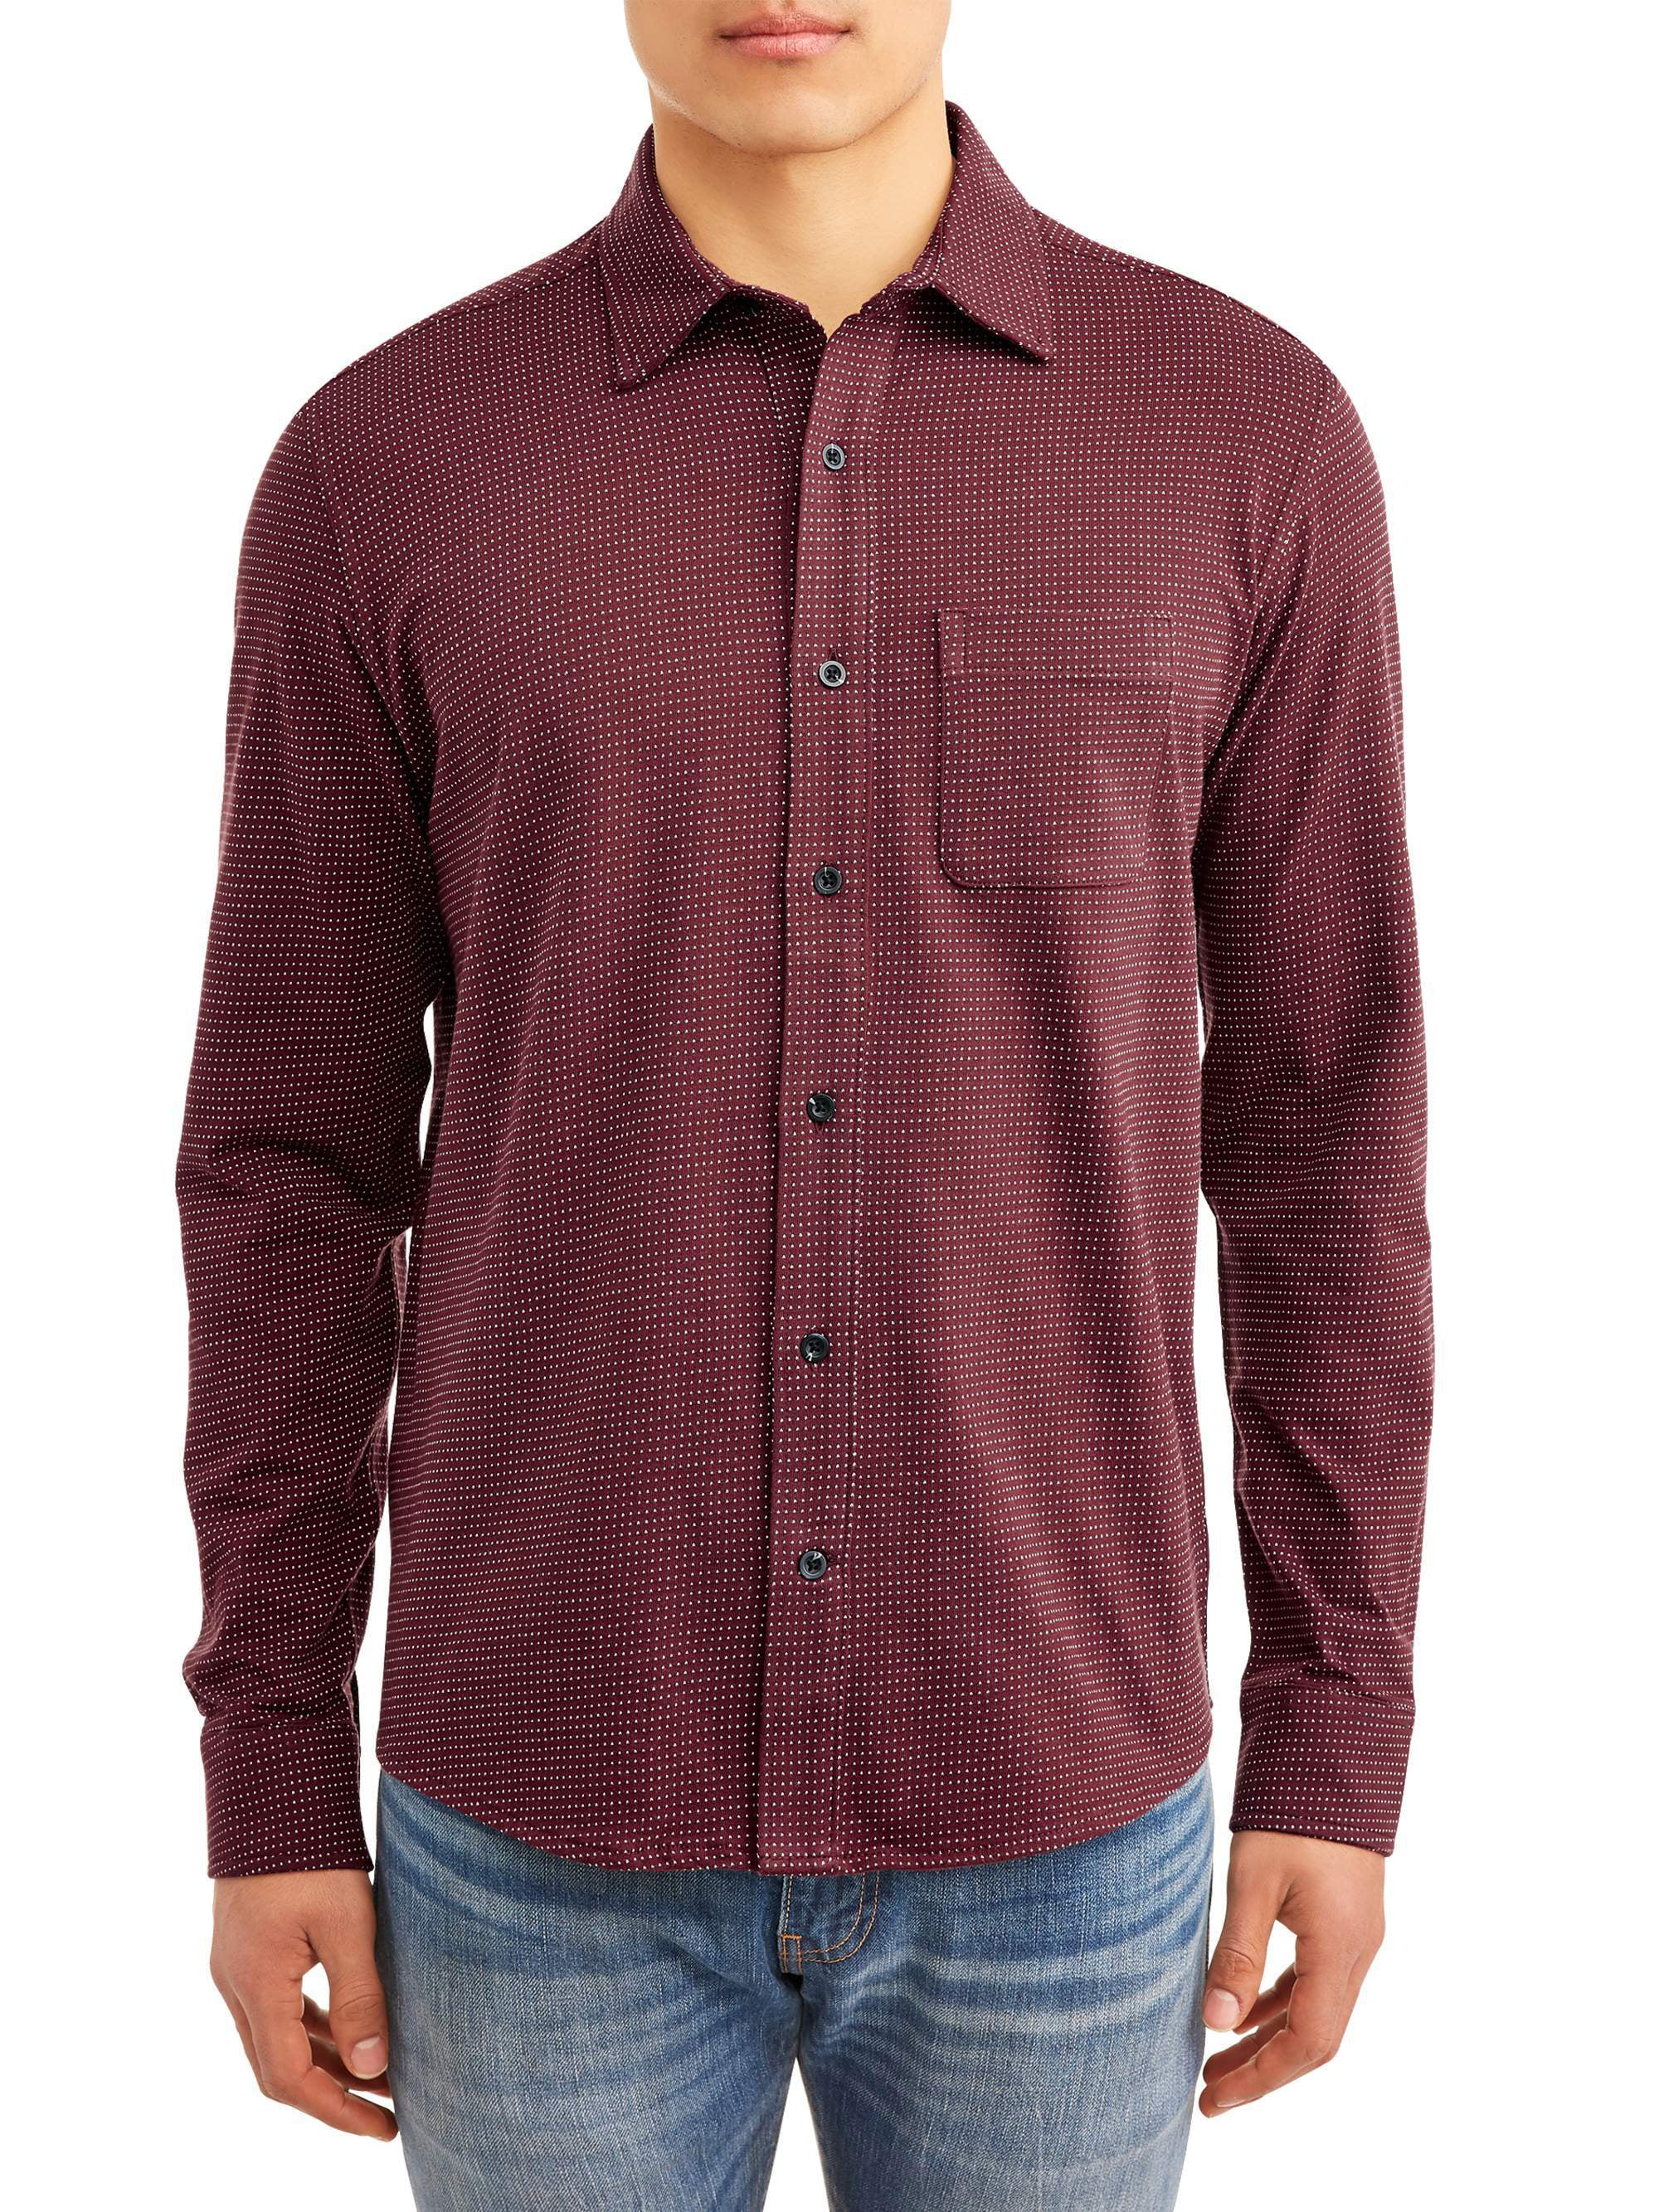 George Mens Long Sleeve Knit Button Down Shirt up to 2XL 